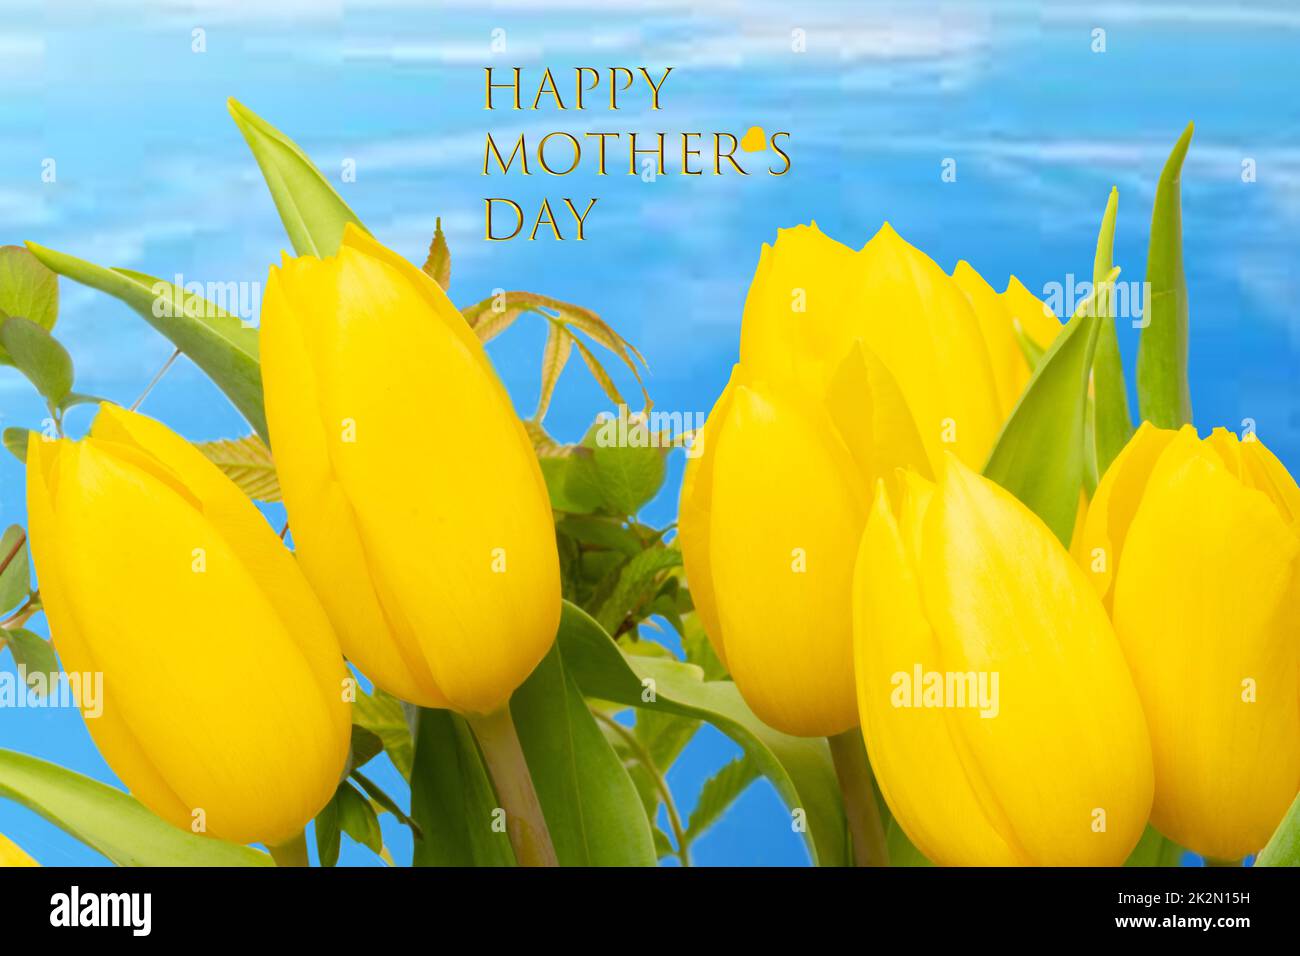 Mothers day greeting card. Decorative composition of a bunch of yellow tulips over abstract blue cloudy sky background with Happy mother's Day text. Stock Photo